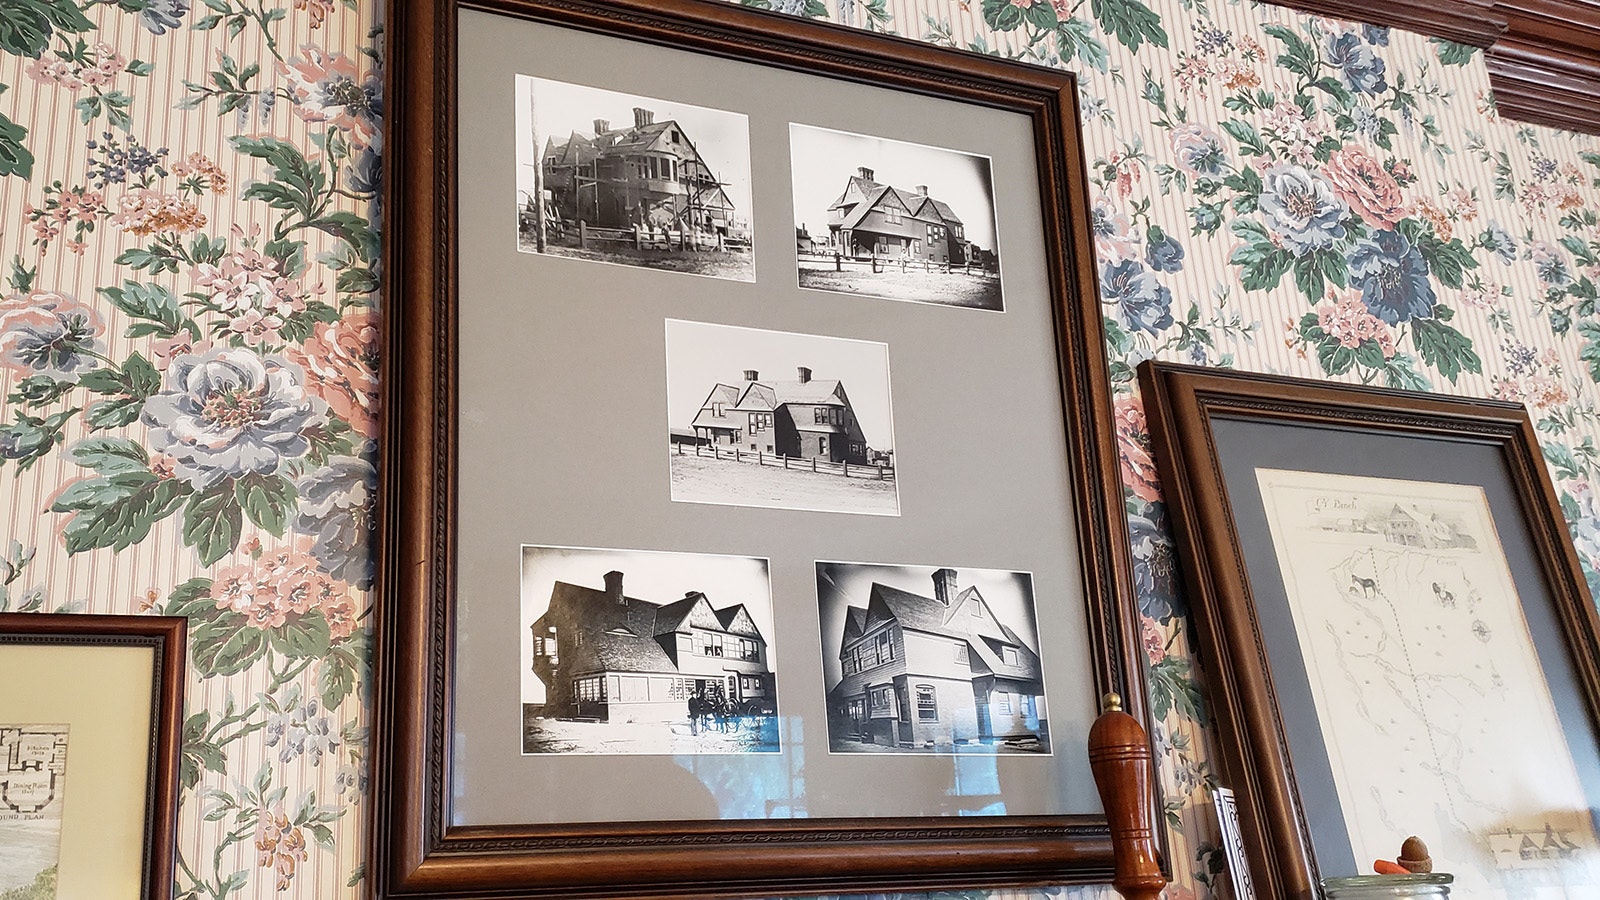 Photos of the original construction of the Sturgis House stay with it when it sells.